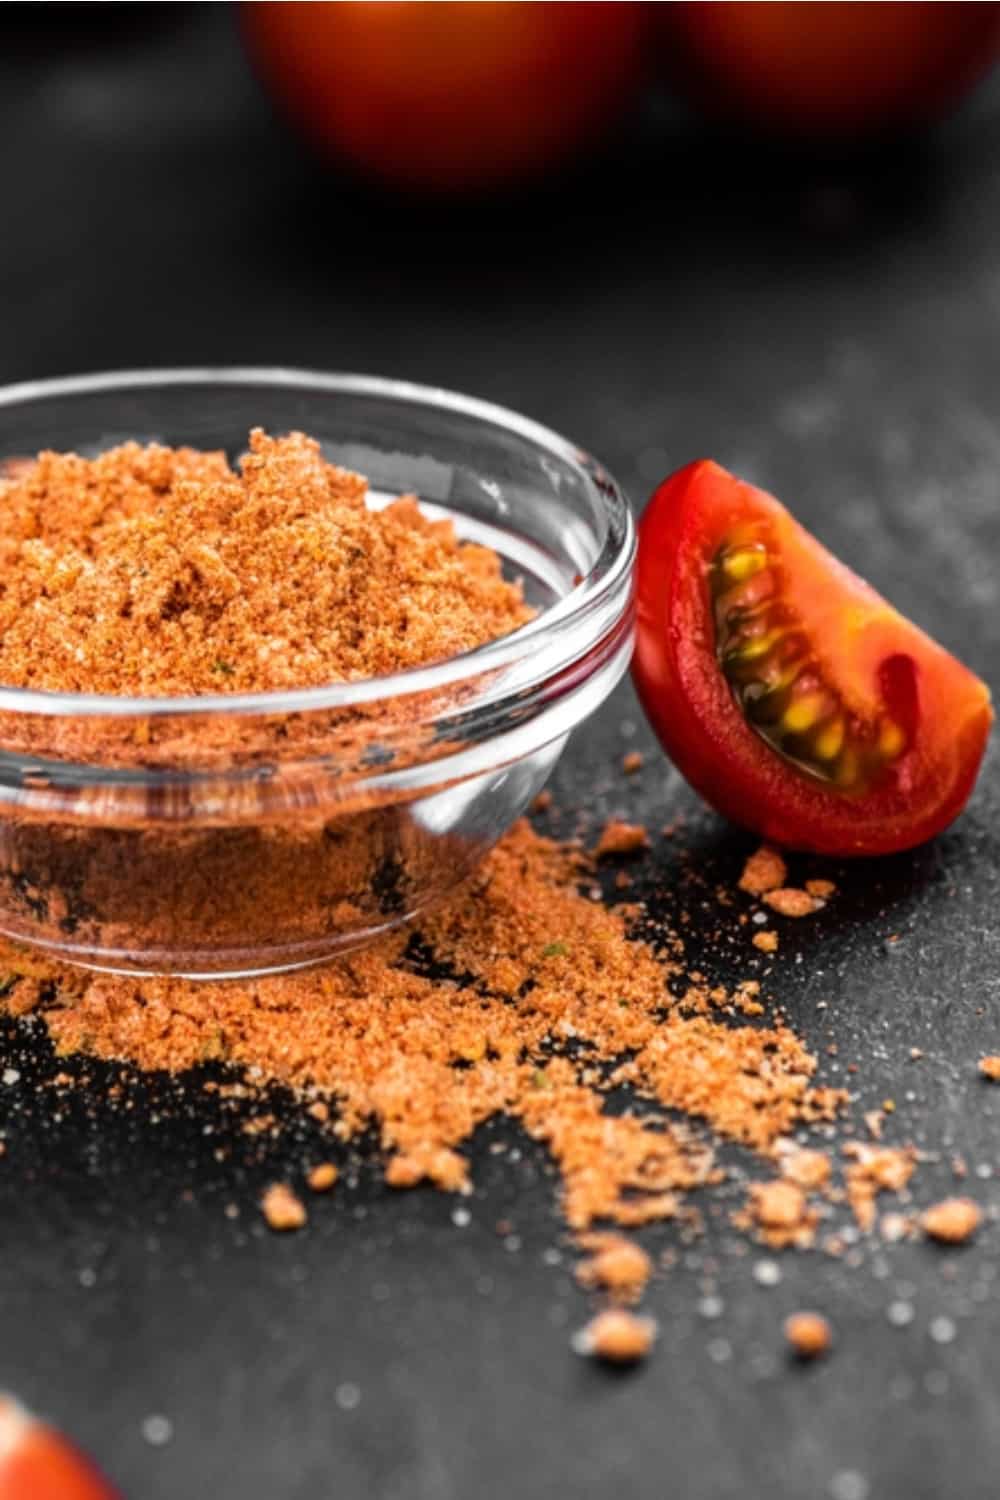 Tomato Powder in a bowl on the table